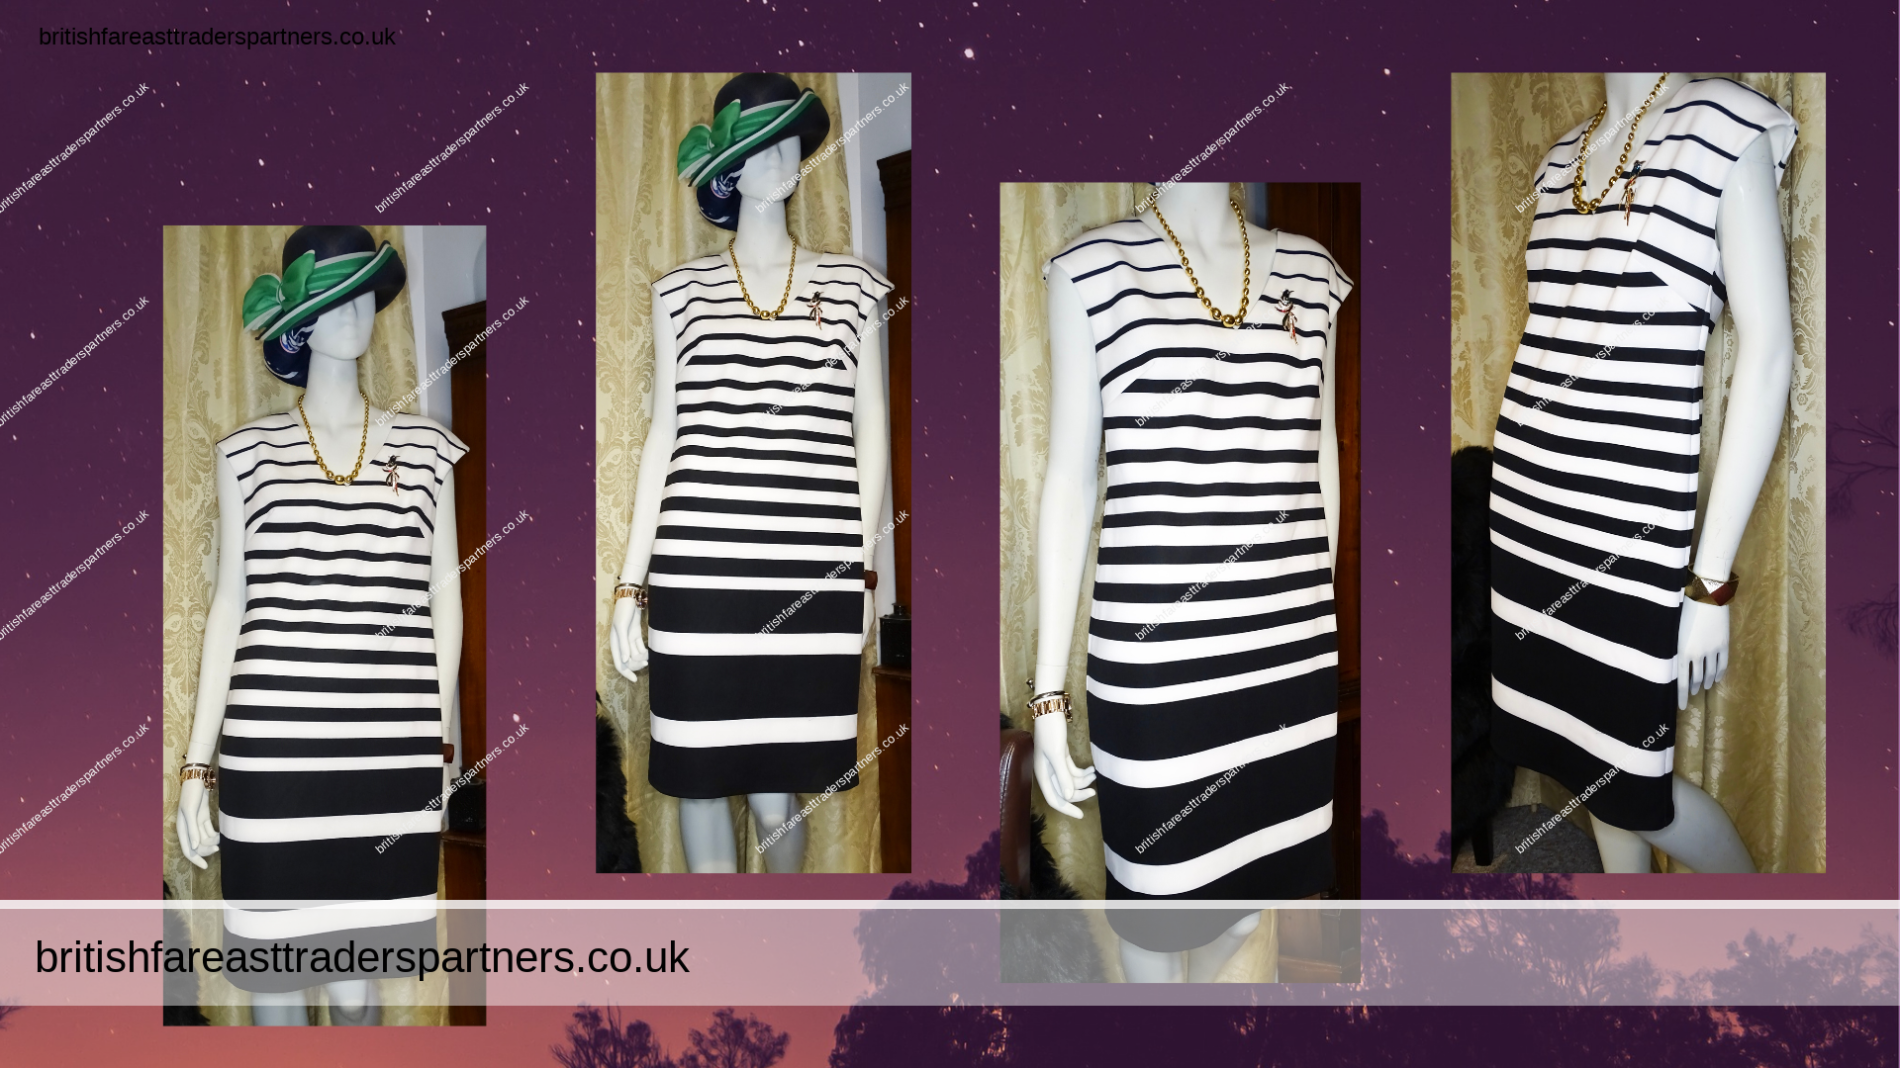 GEORGE Block Stripes Black White NAUTICAL SUMMER HOLIDAY Stretch SHIFT Dress UK 12 / EURO 40 MADE IN MOROCCO